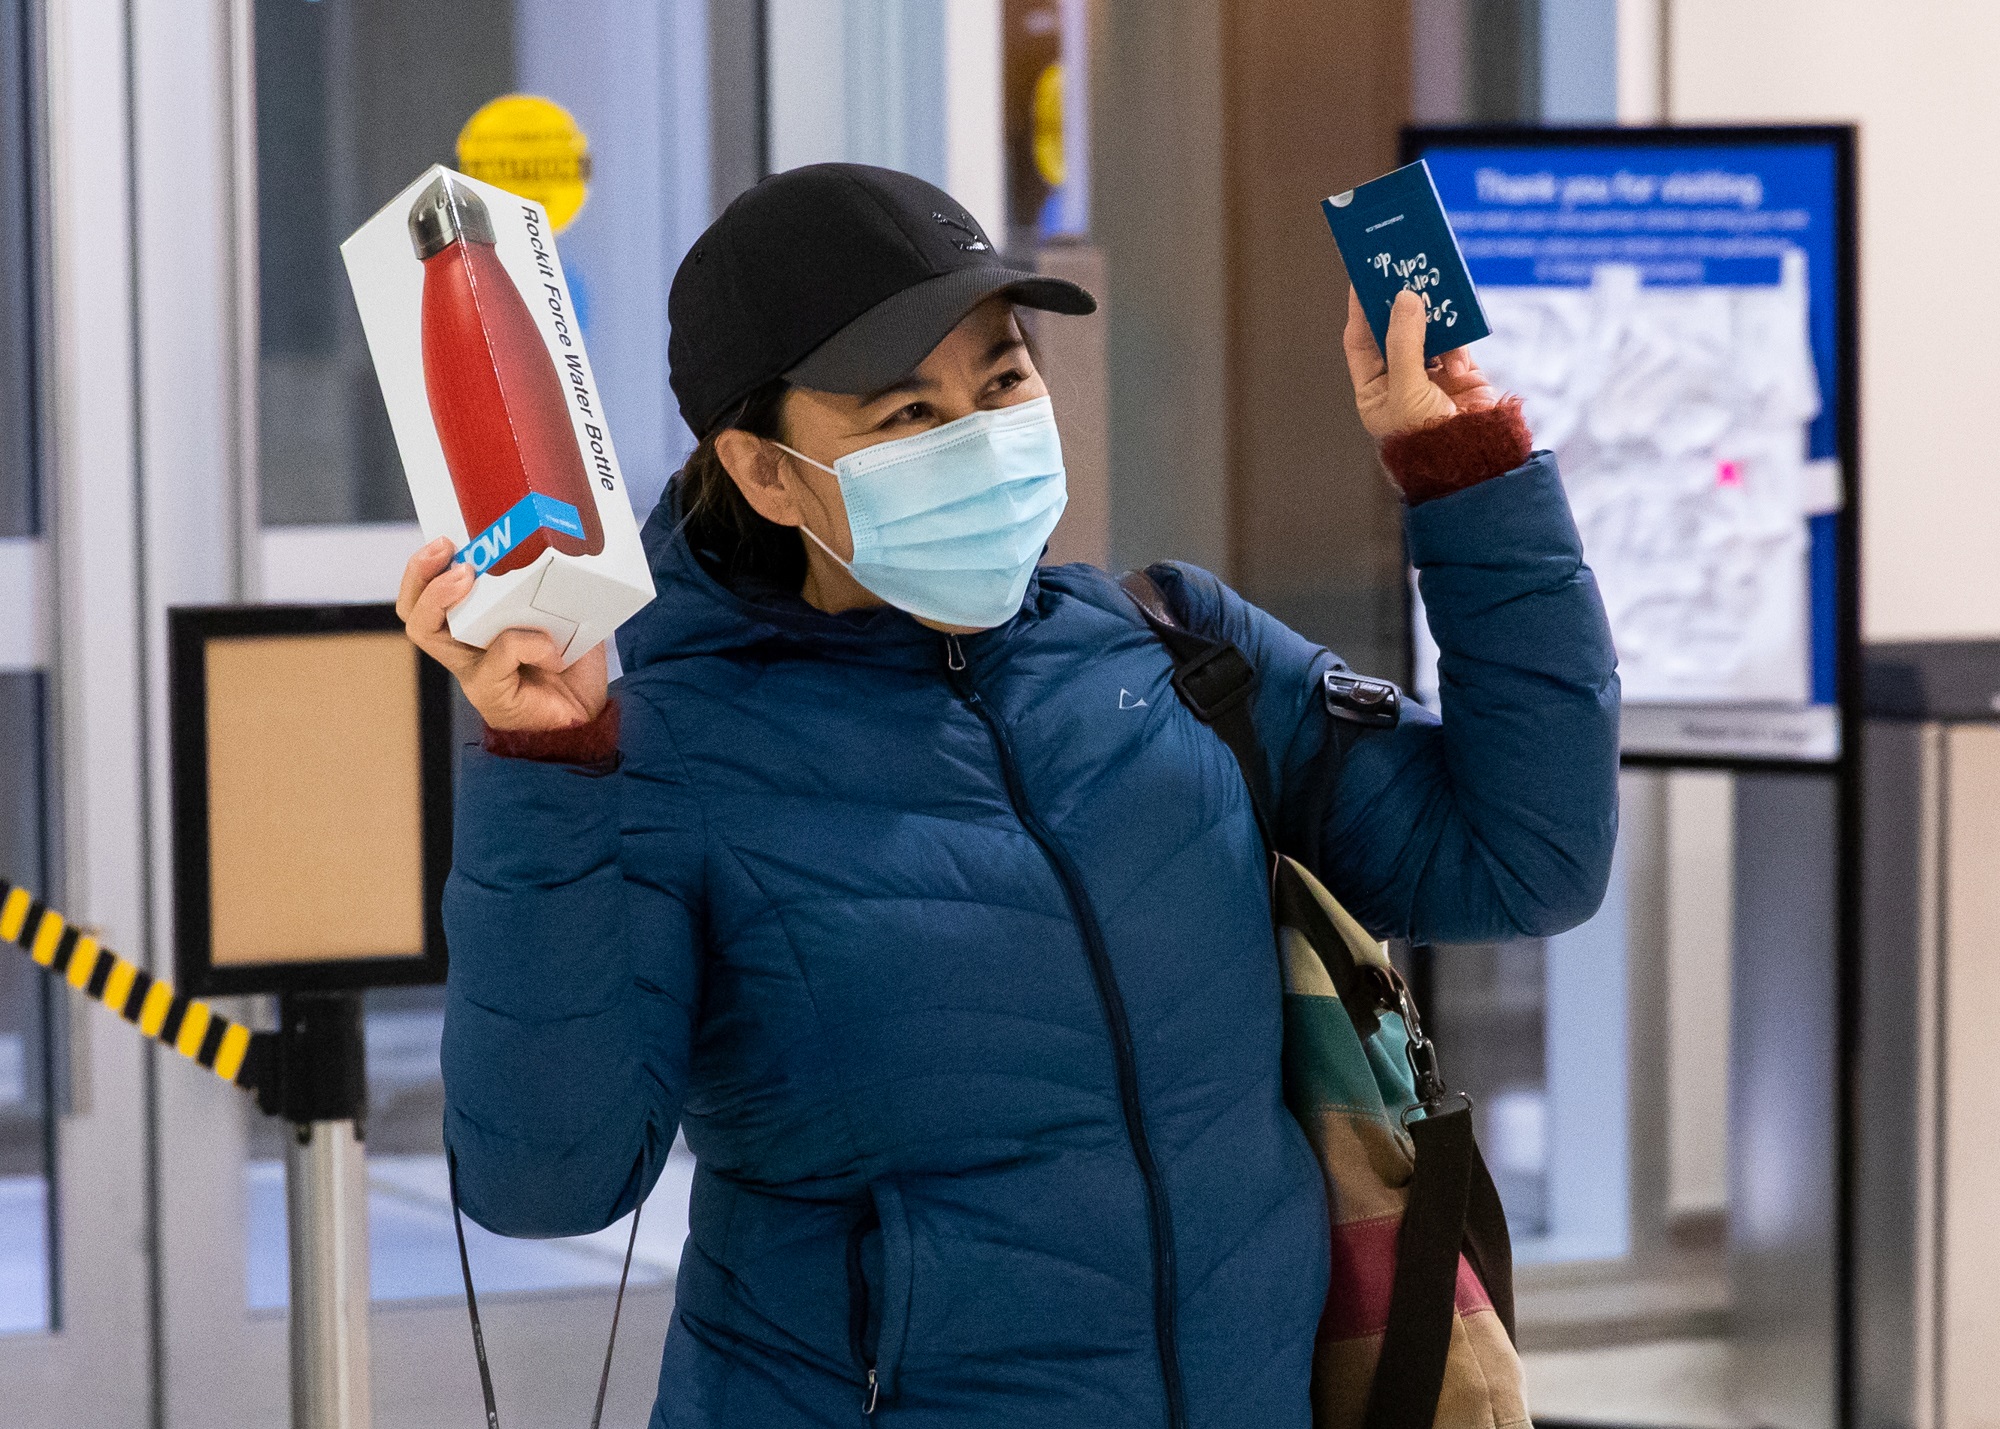 An employee at Hennick Bridgepoint Hospital with her arms up holding a water bottle as she is arriving at the hospital.